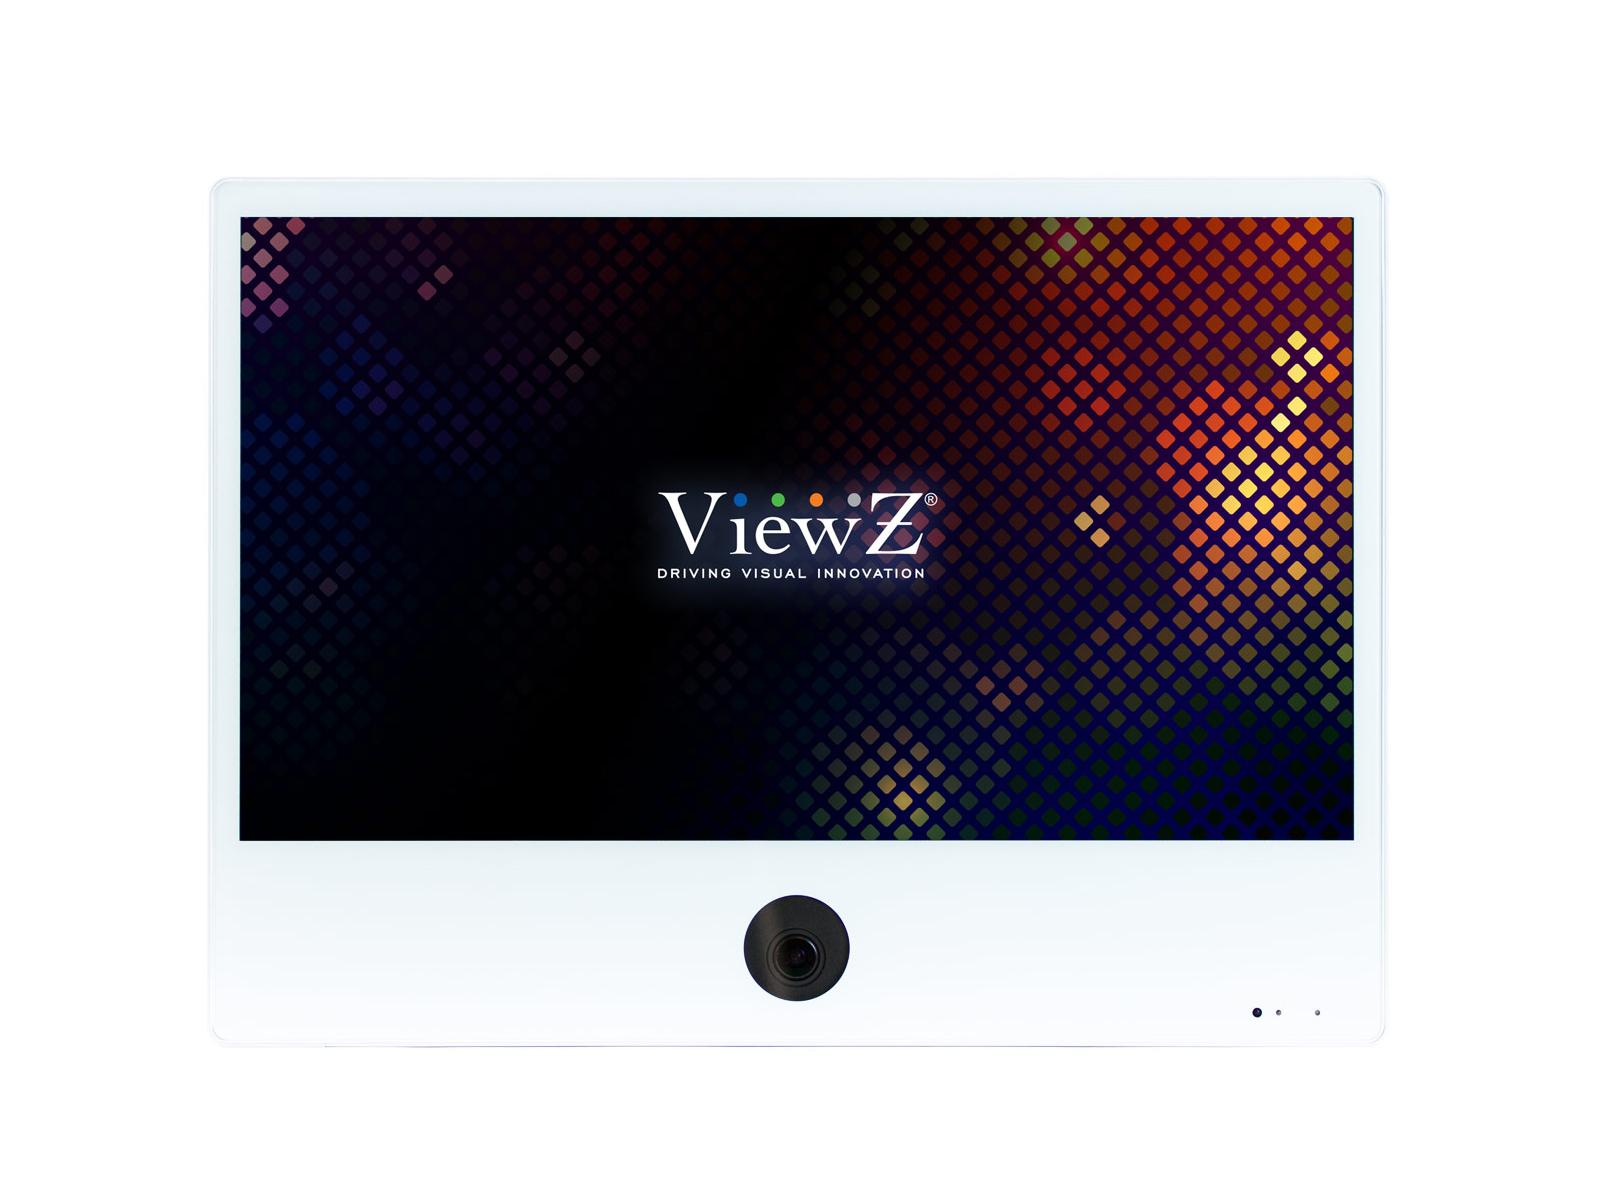 VZ-PVM-I2W3N 23.6 inch 1920x1080 IP Based Public View Monitor with 2MP Camera/White by ViewZ